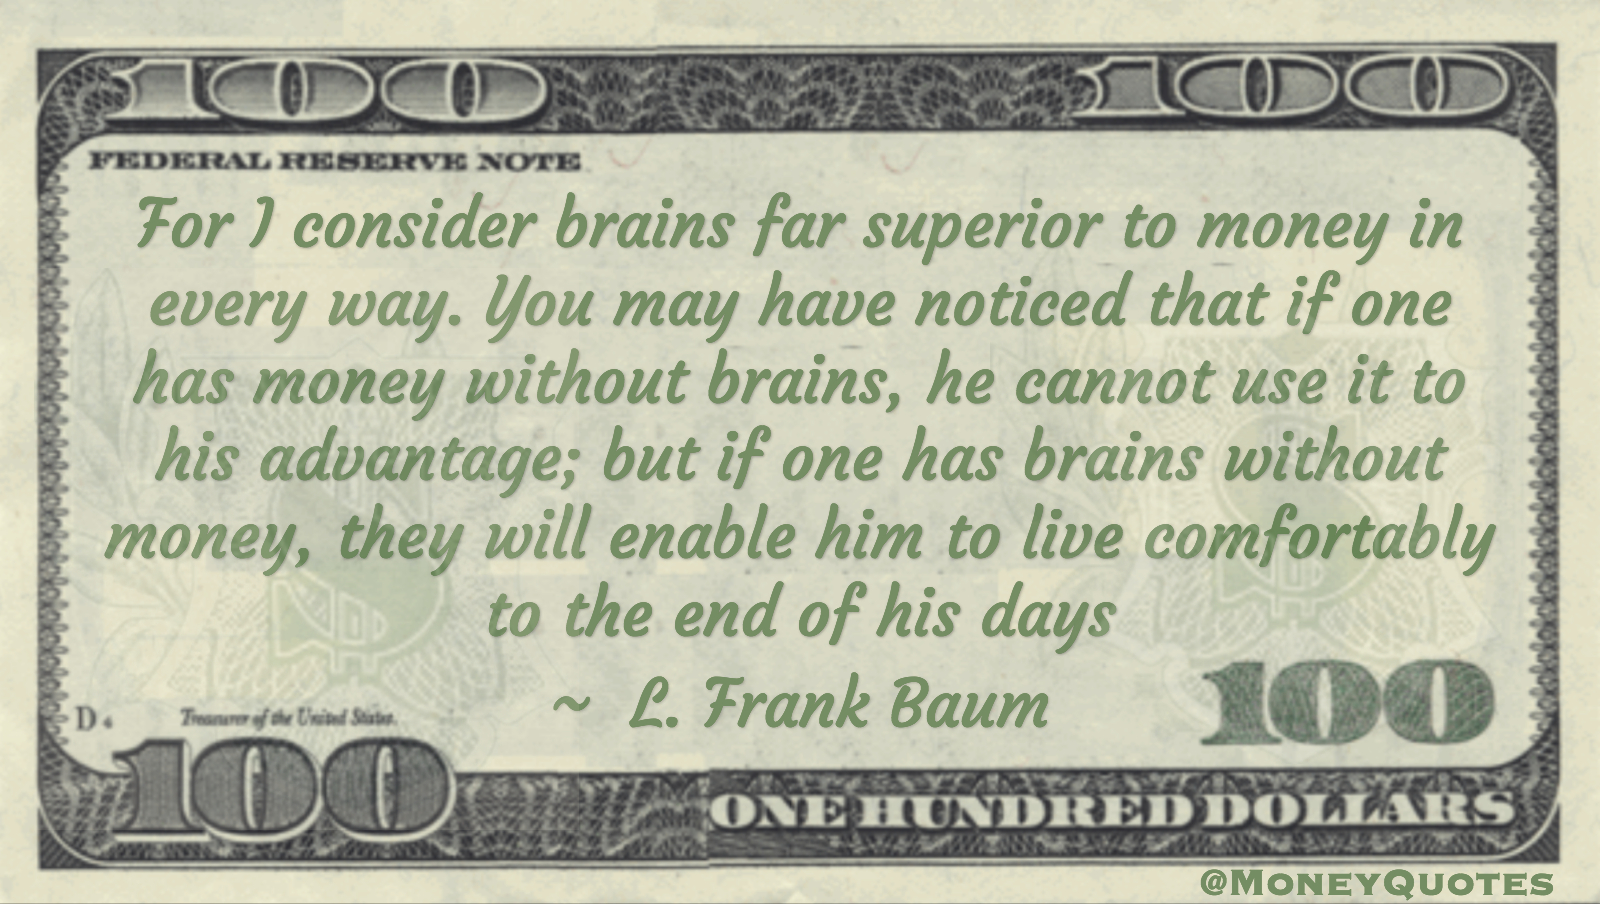 I consider brains far superior to money in every way, enable to live comfortably to the end of his days Quote